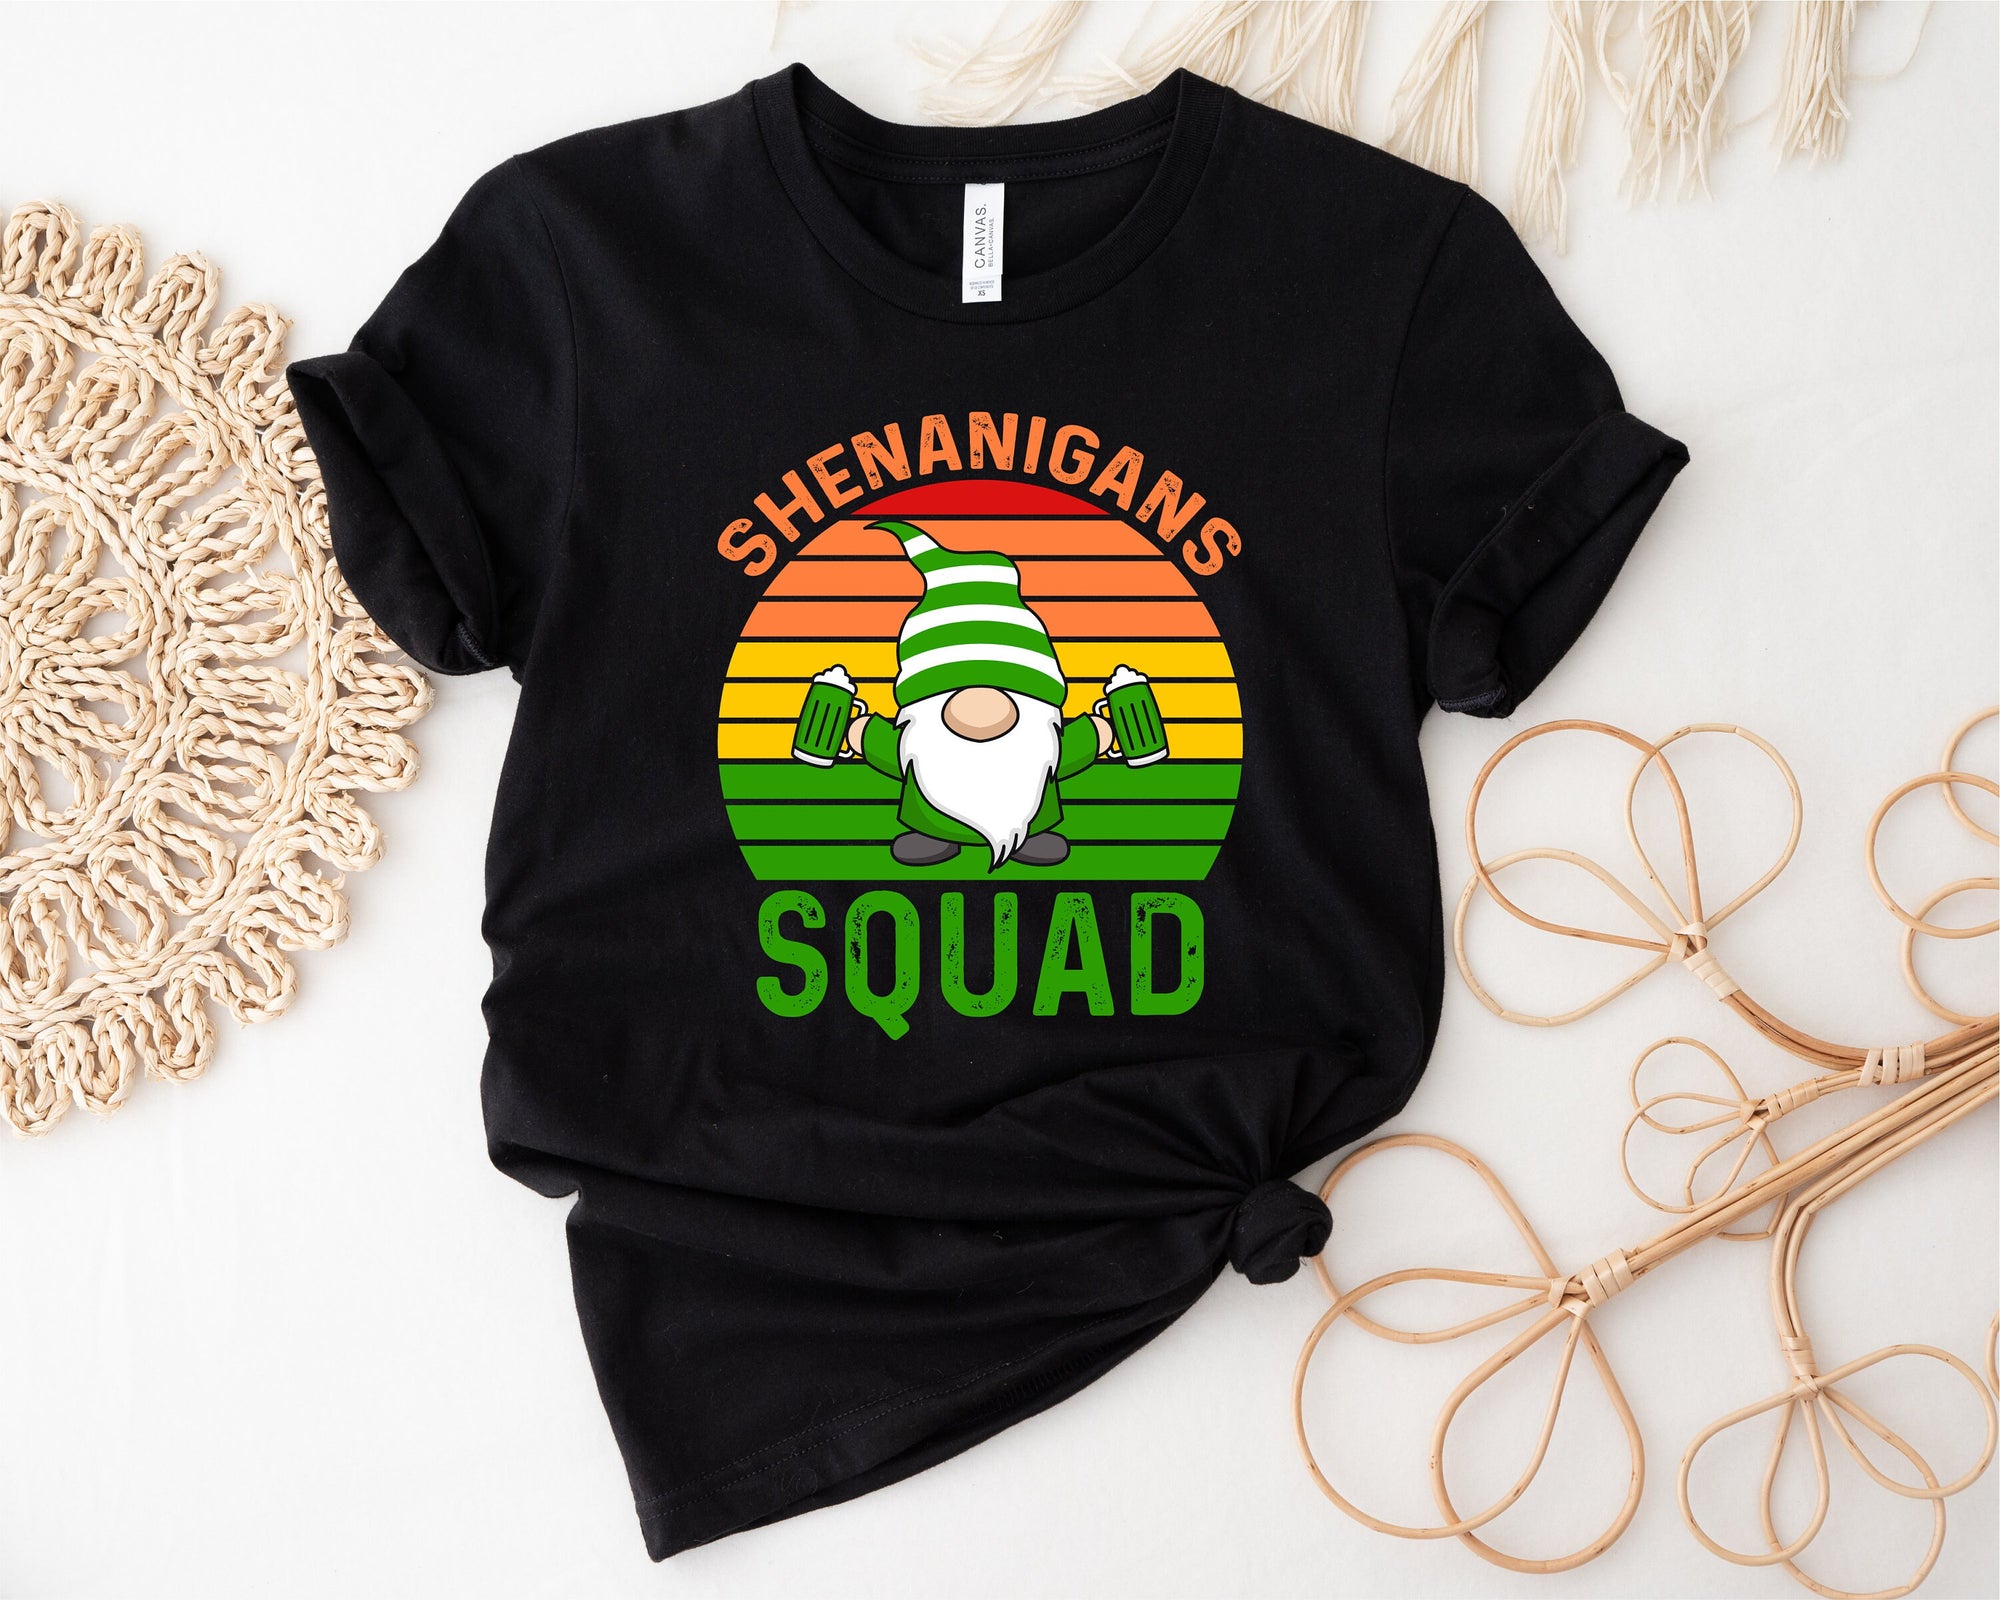 St Patrick's Day T-Shirt, Shenanigans Squad T-Shirt, Men's, Women's, Child's and Baby Sizing, St Patrick's Day Gnomes, Happy St Paddy's Day